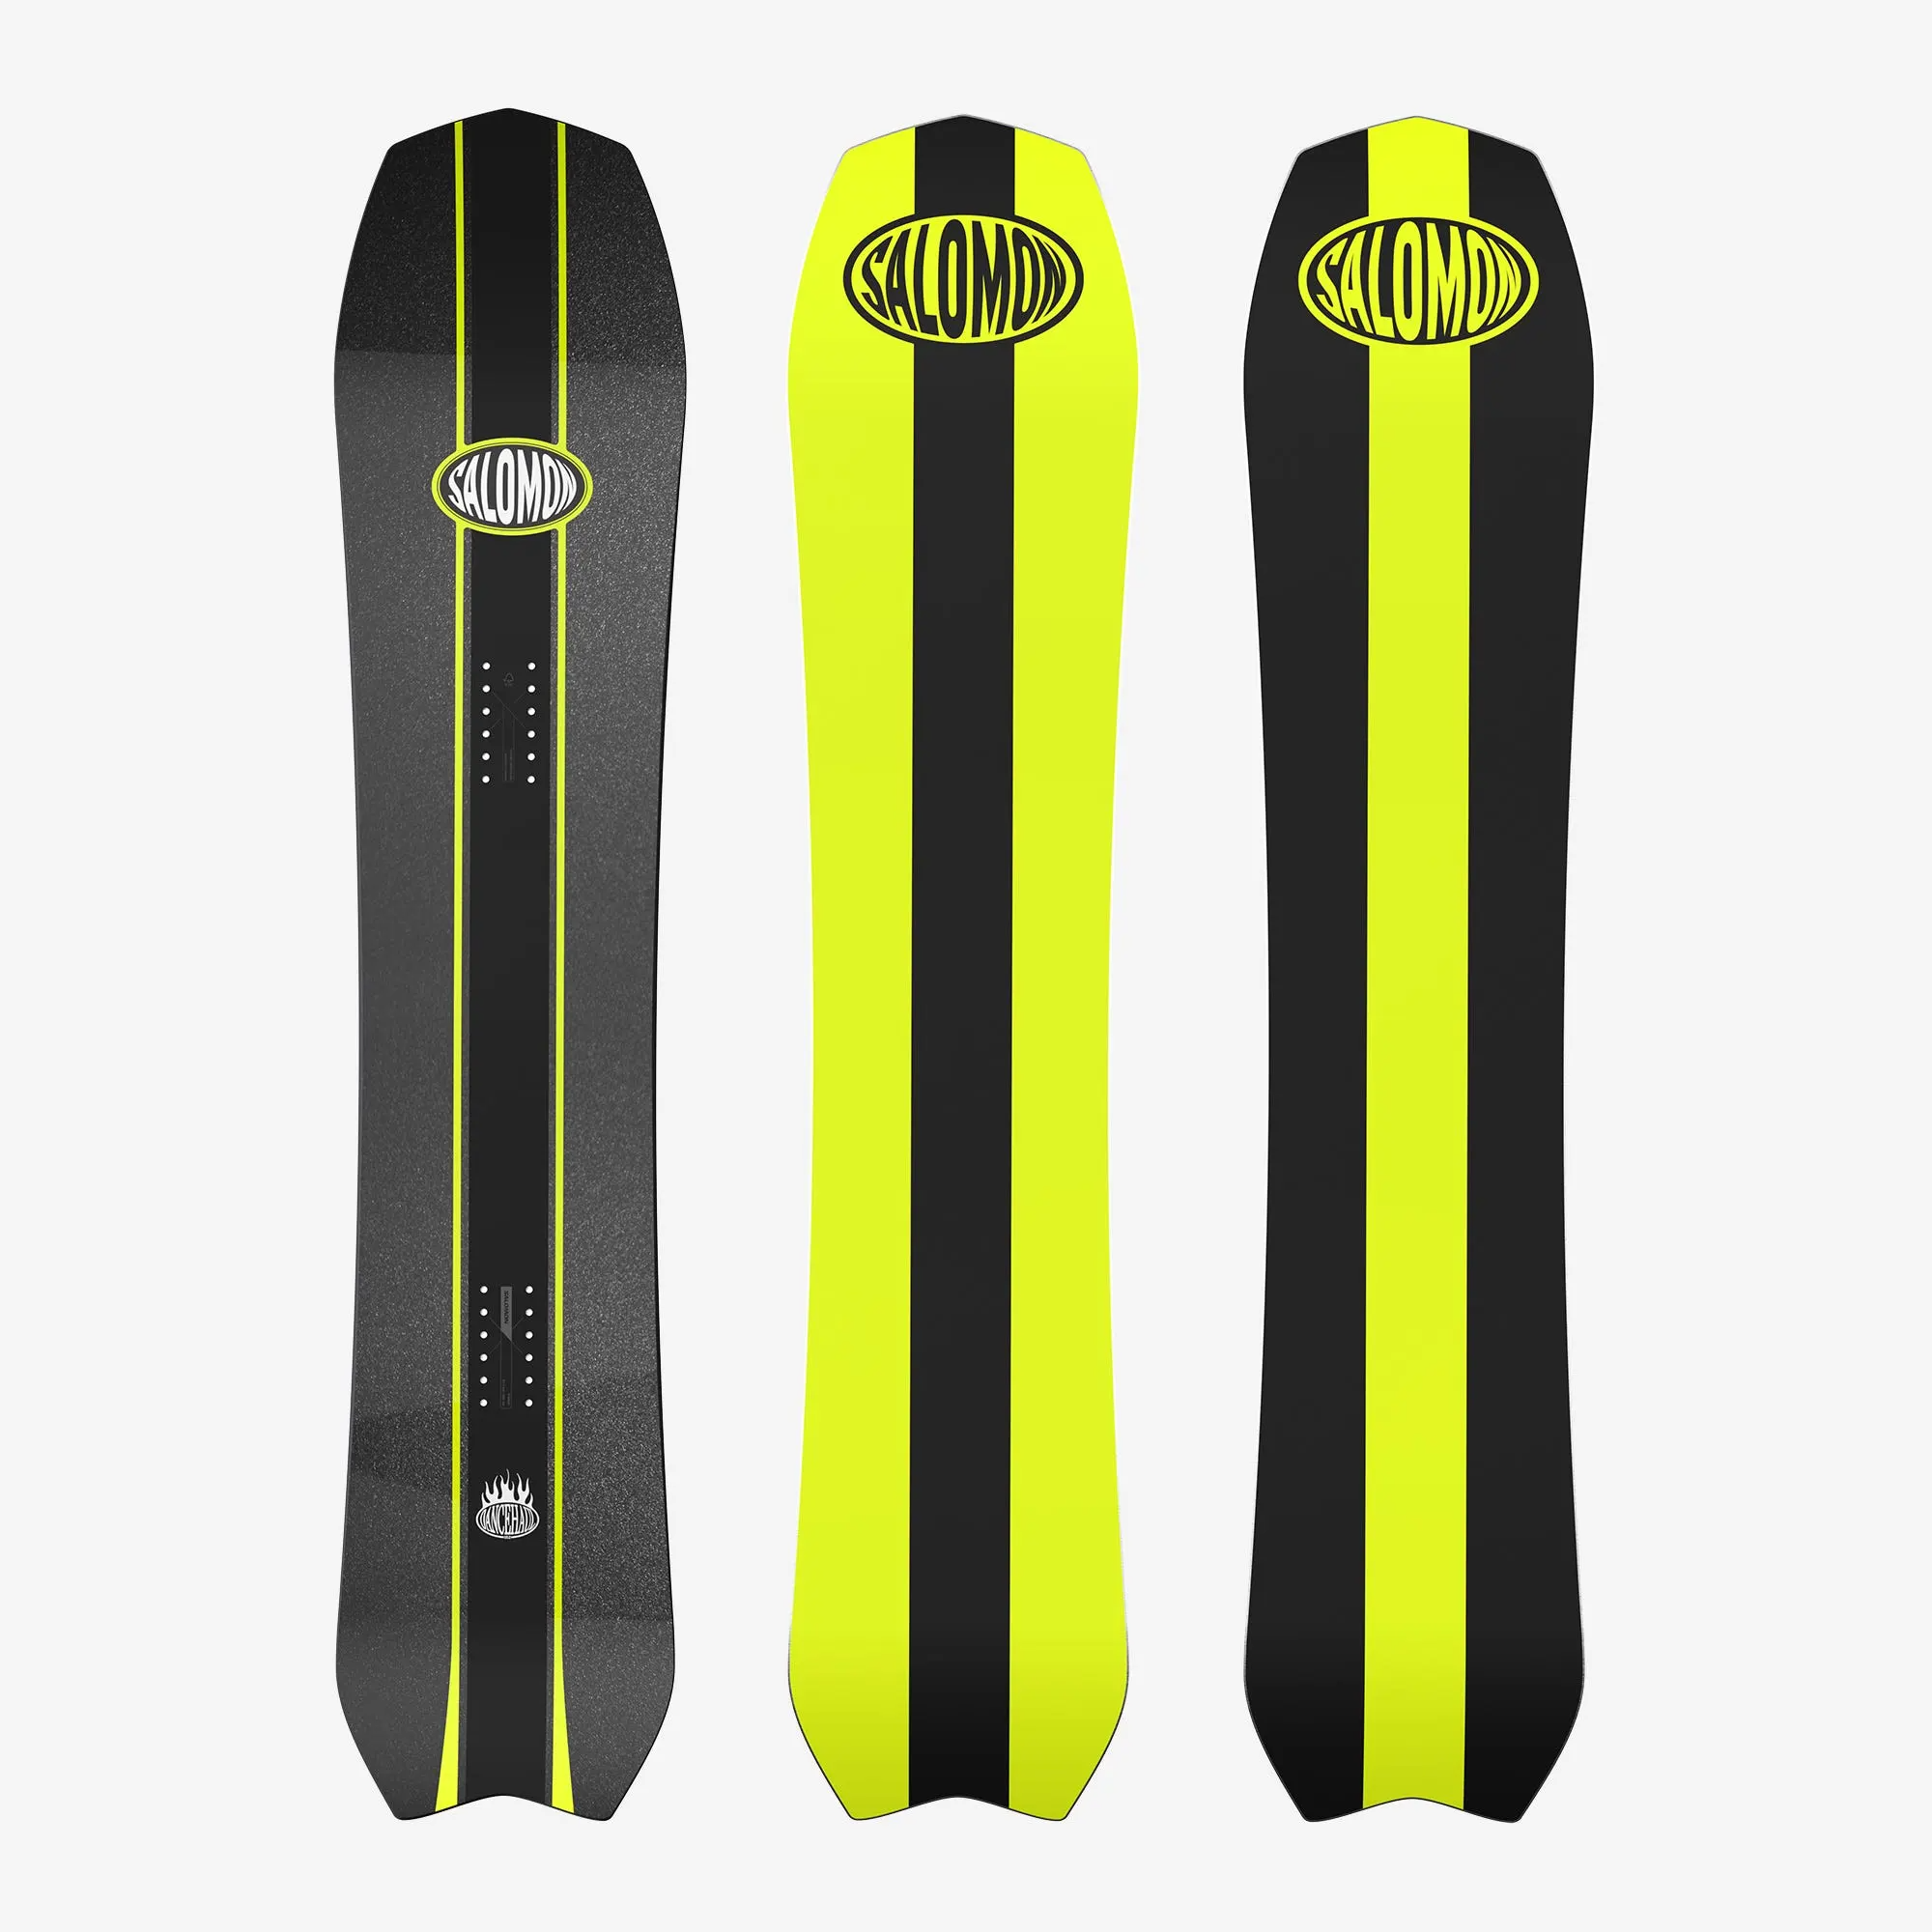 Turn up for the Dancehaul. This unisex board has a mountain of personality for every riding style. Extra width and a tapered directional shape transform ordinary to extraordinary with maximum agility in any snow scenario. Rock Out Camber with Popster Core and Ghost Basalt Stringers play as a reminder that freestyle can happen anywhere.